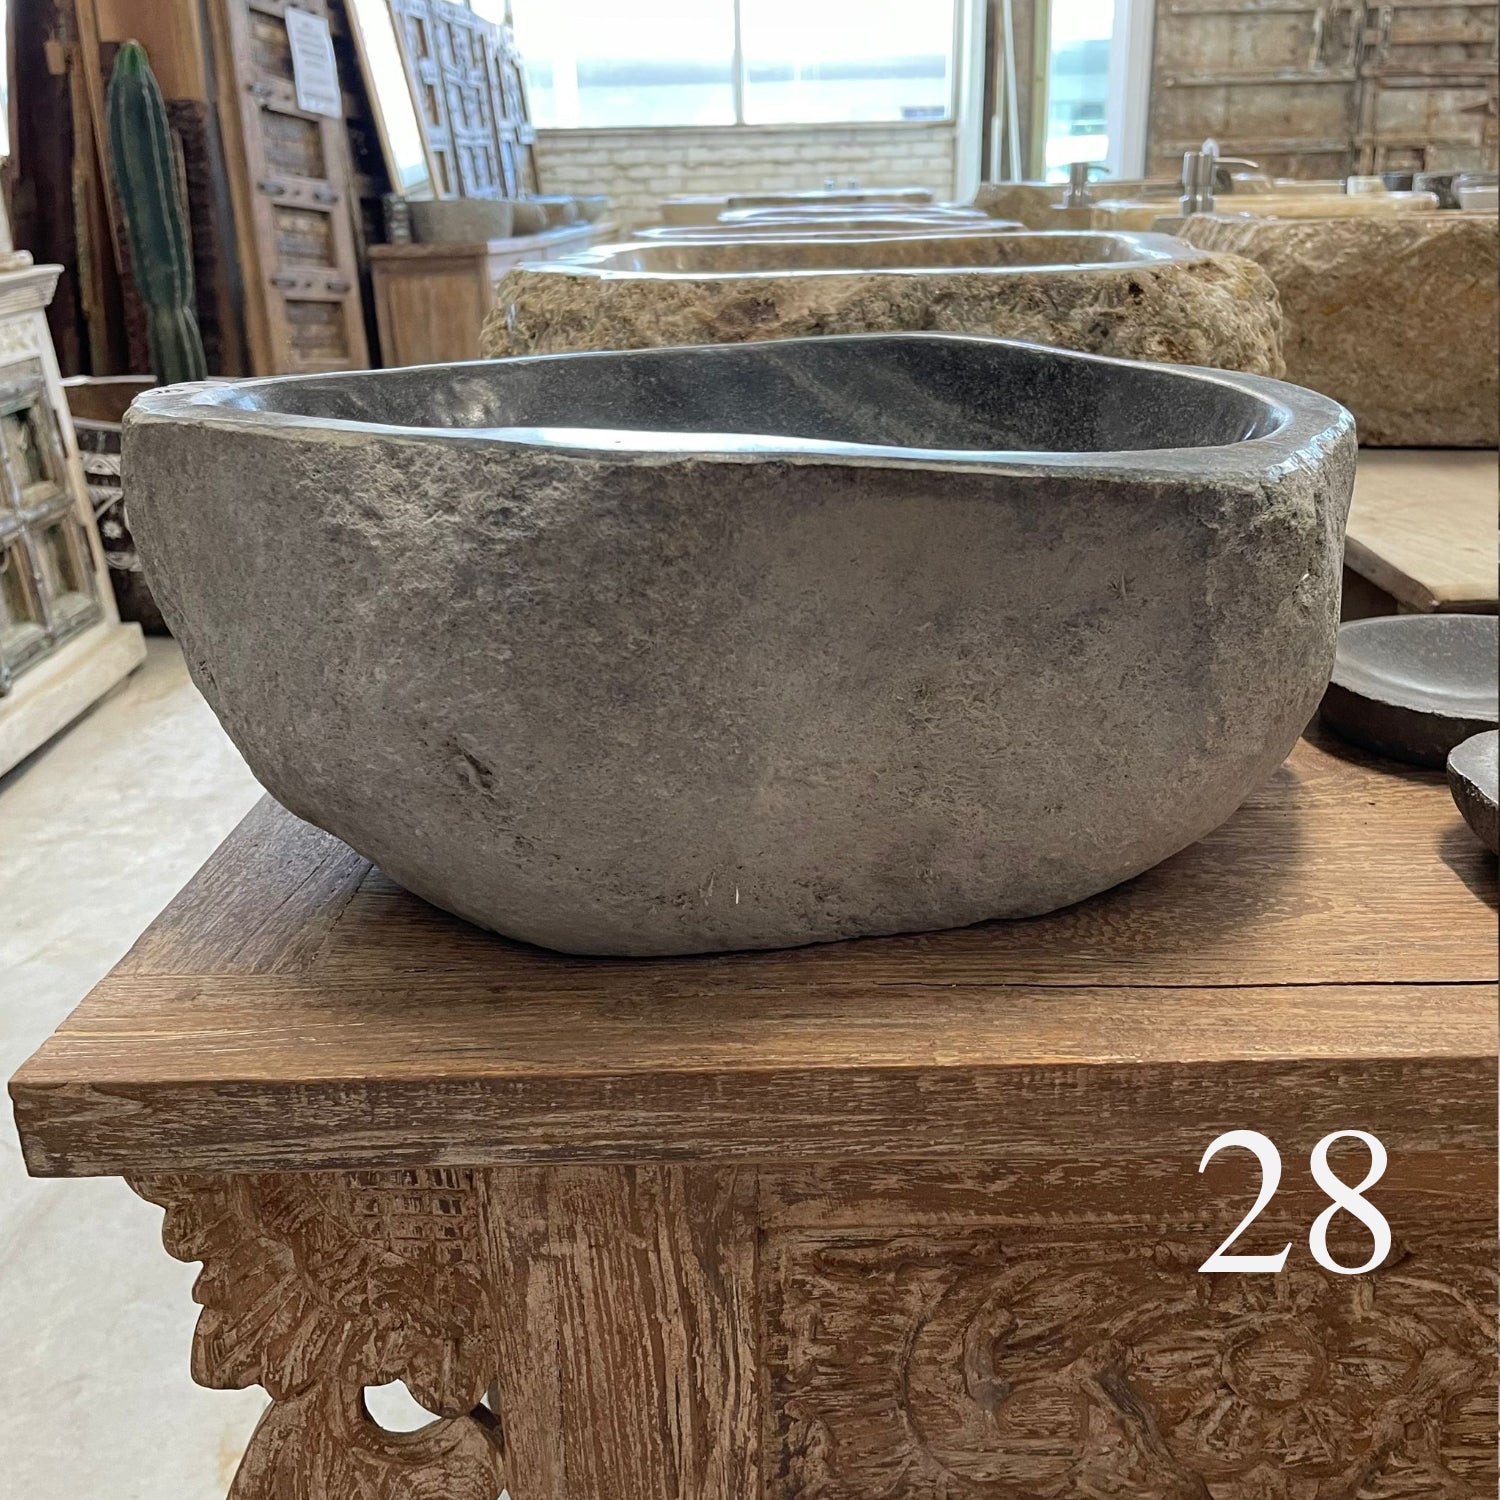 Small River Stone Basins | Assorted Sizes